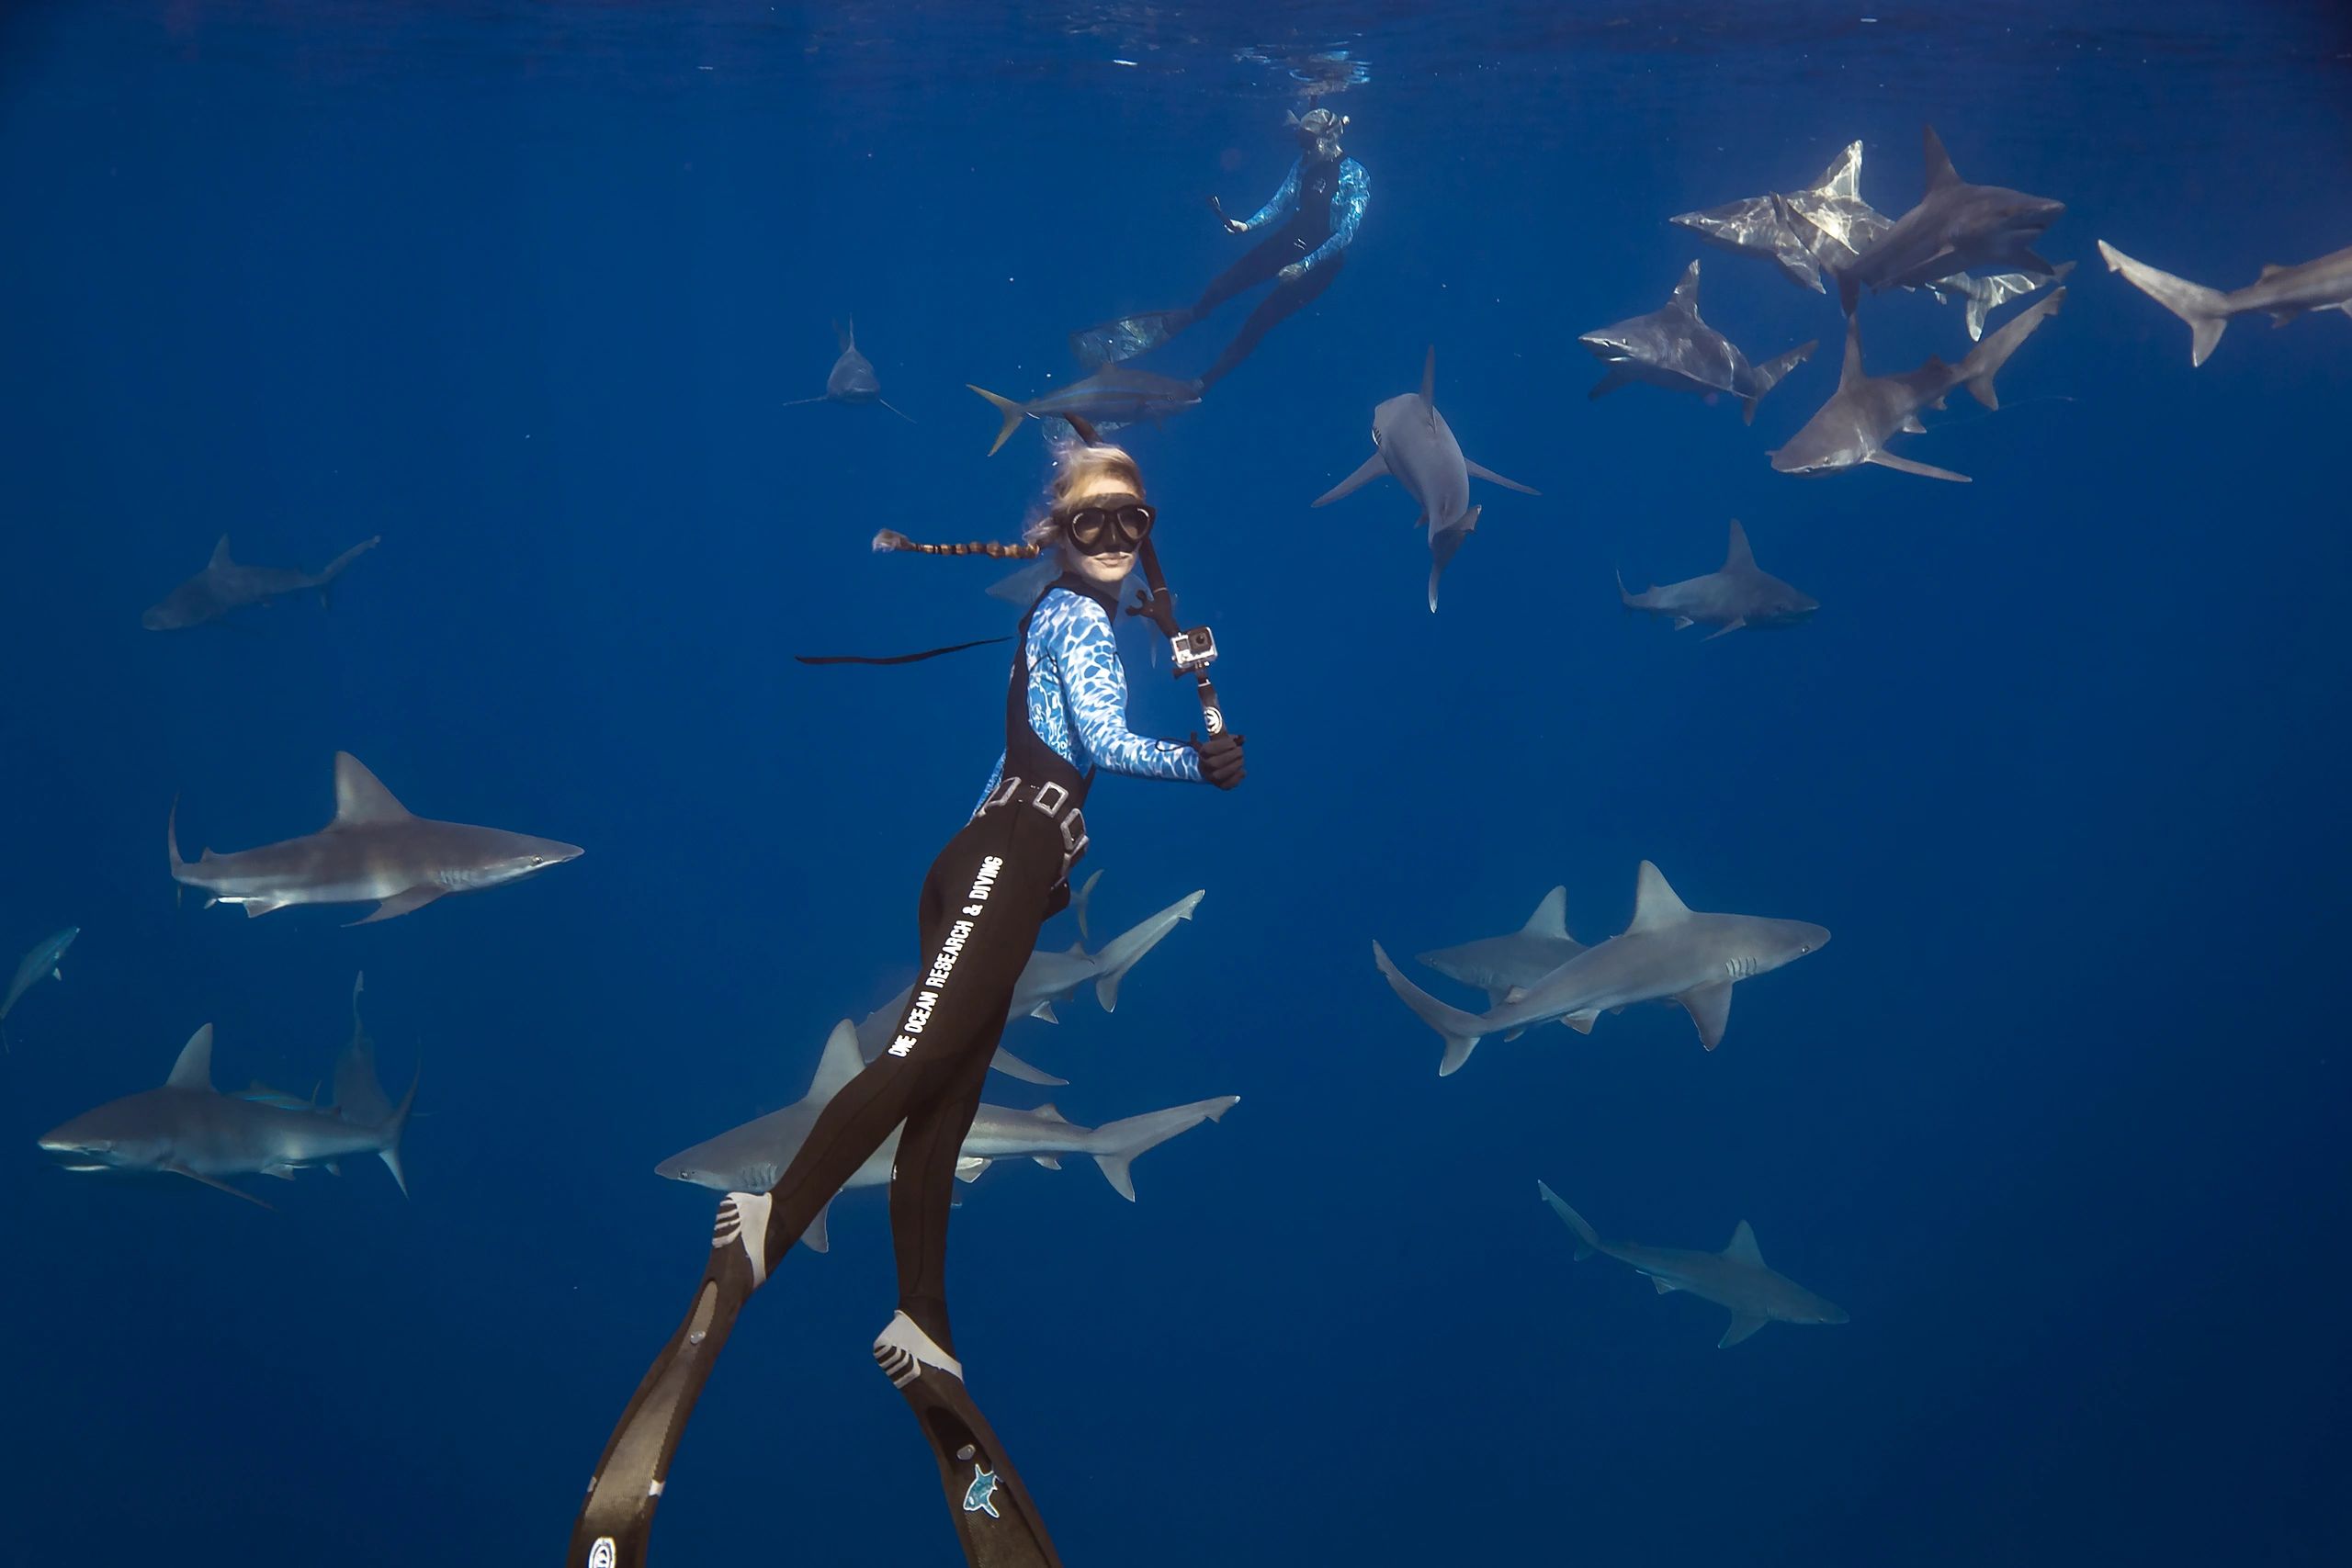 people swimming with sharks